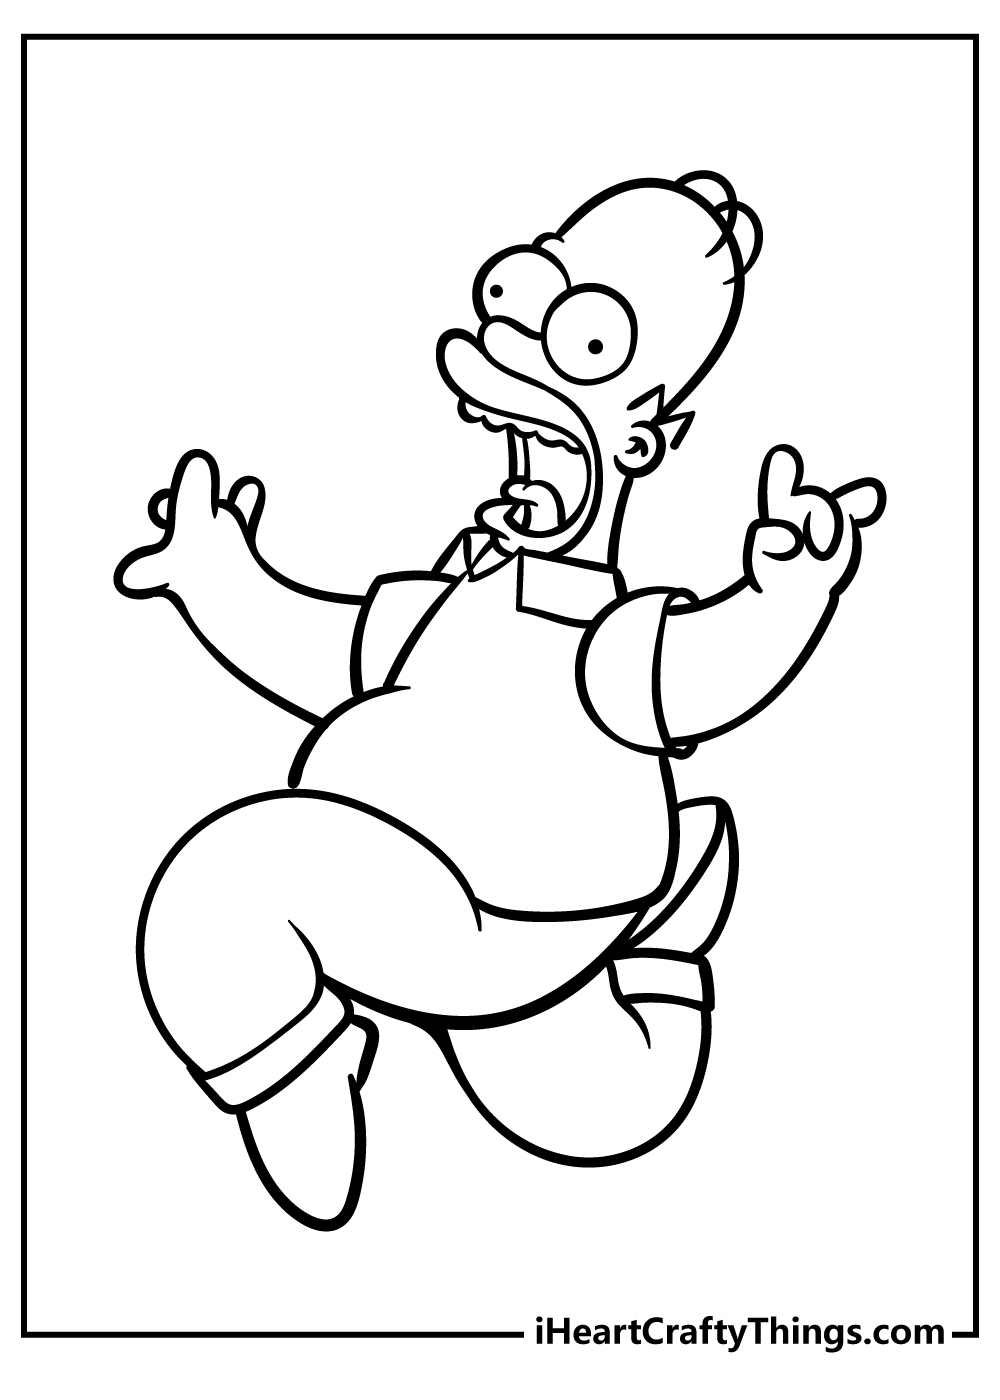 Simpsons Coloring Book for kids free printable